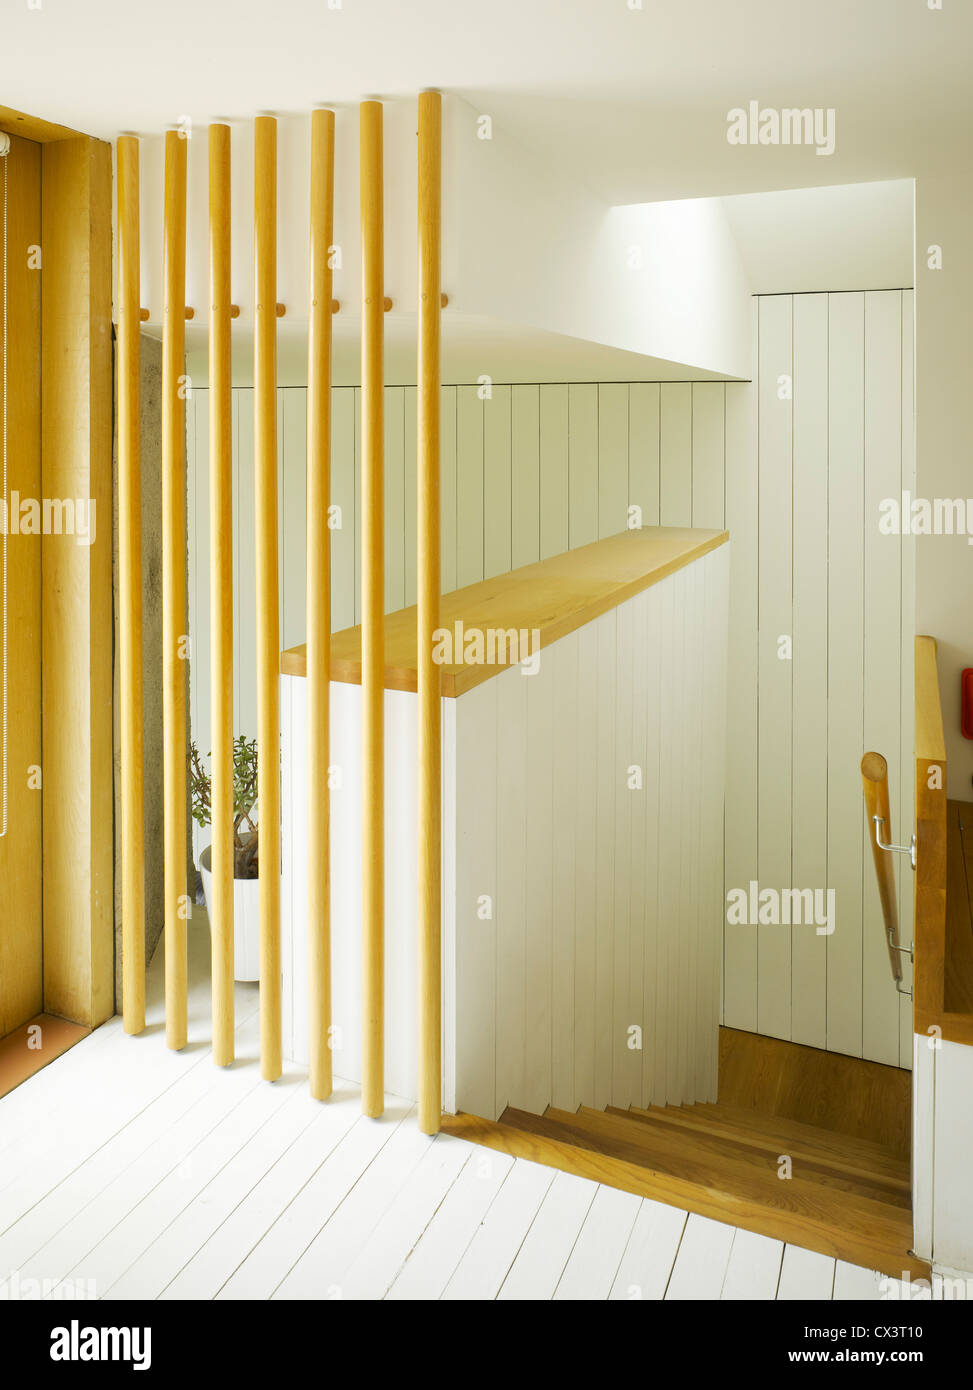 Recasting Extension & Refurbishment, Dundrum, Ireland. Architect: Donaghy + Dimond, 2011. View of stairs showing white painted c Stock Photo